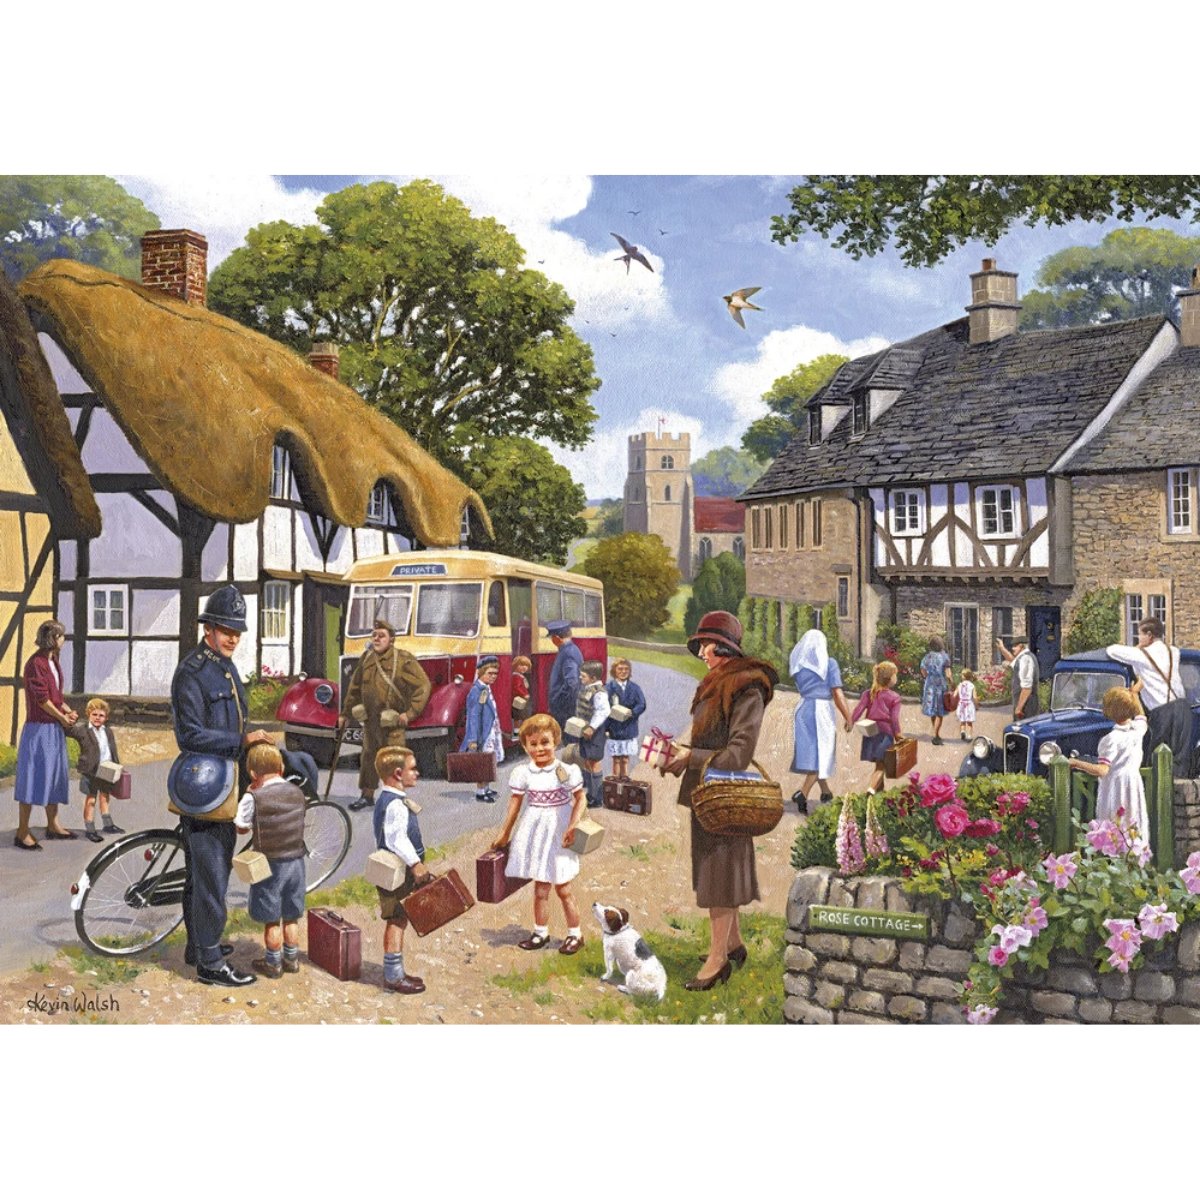 Gibsons The Evacuees Jigsaw Puzzle (4x 500 Pieces) - Phillips Hobbies